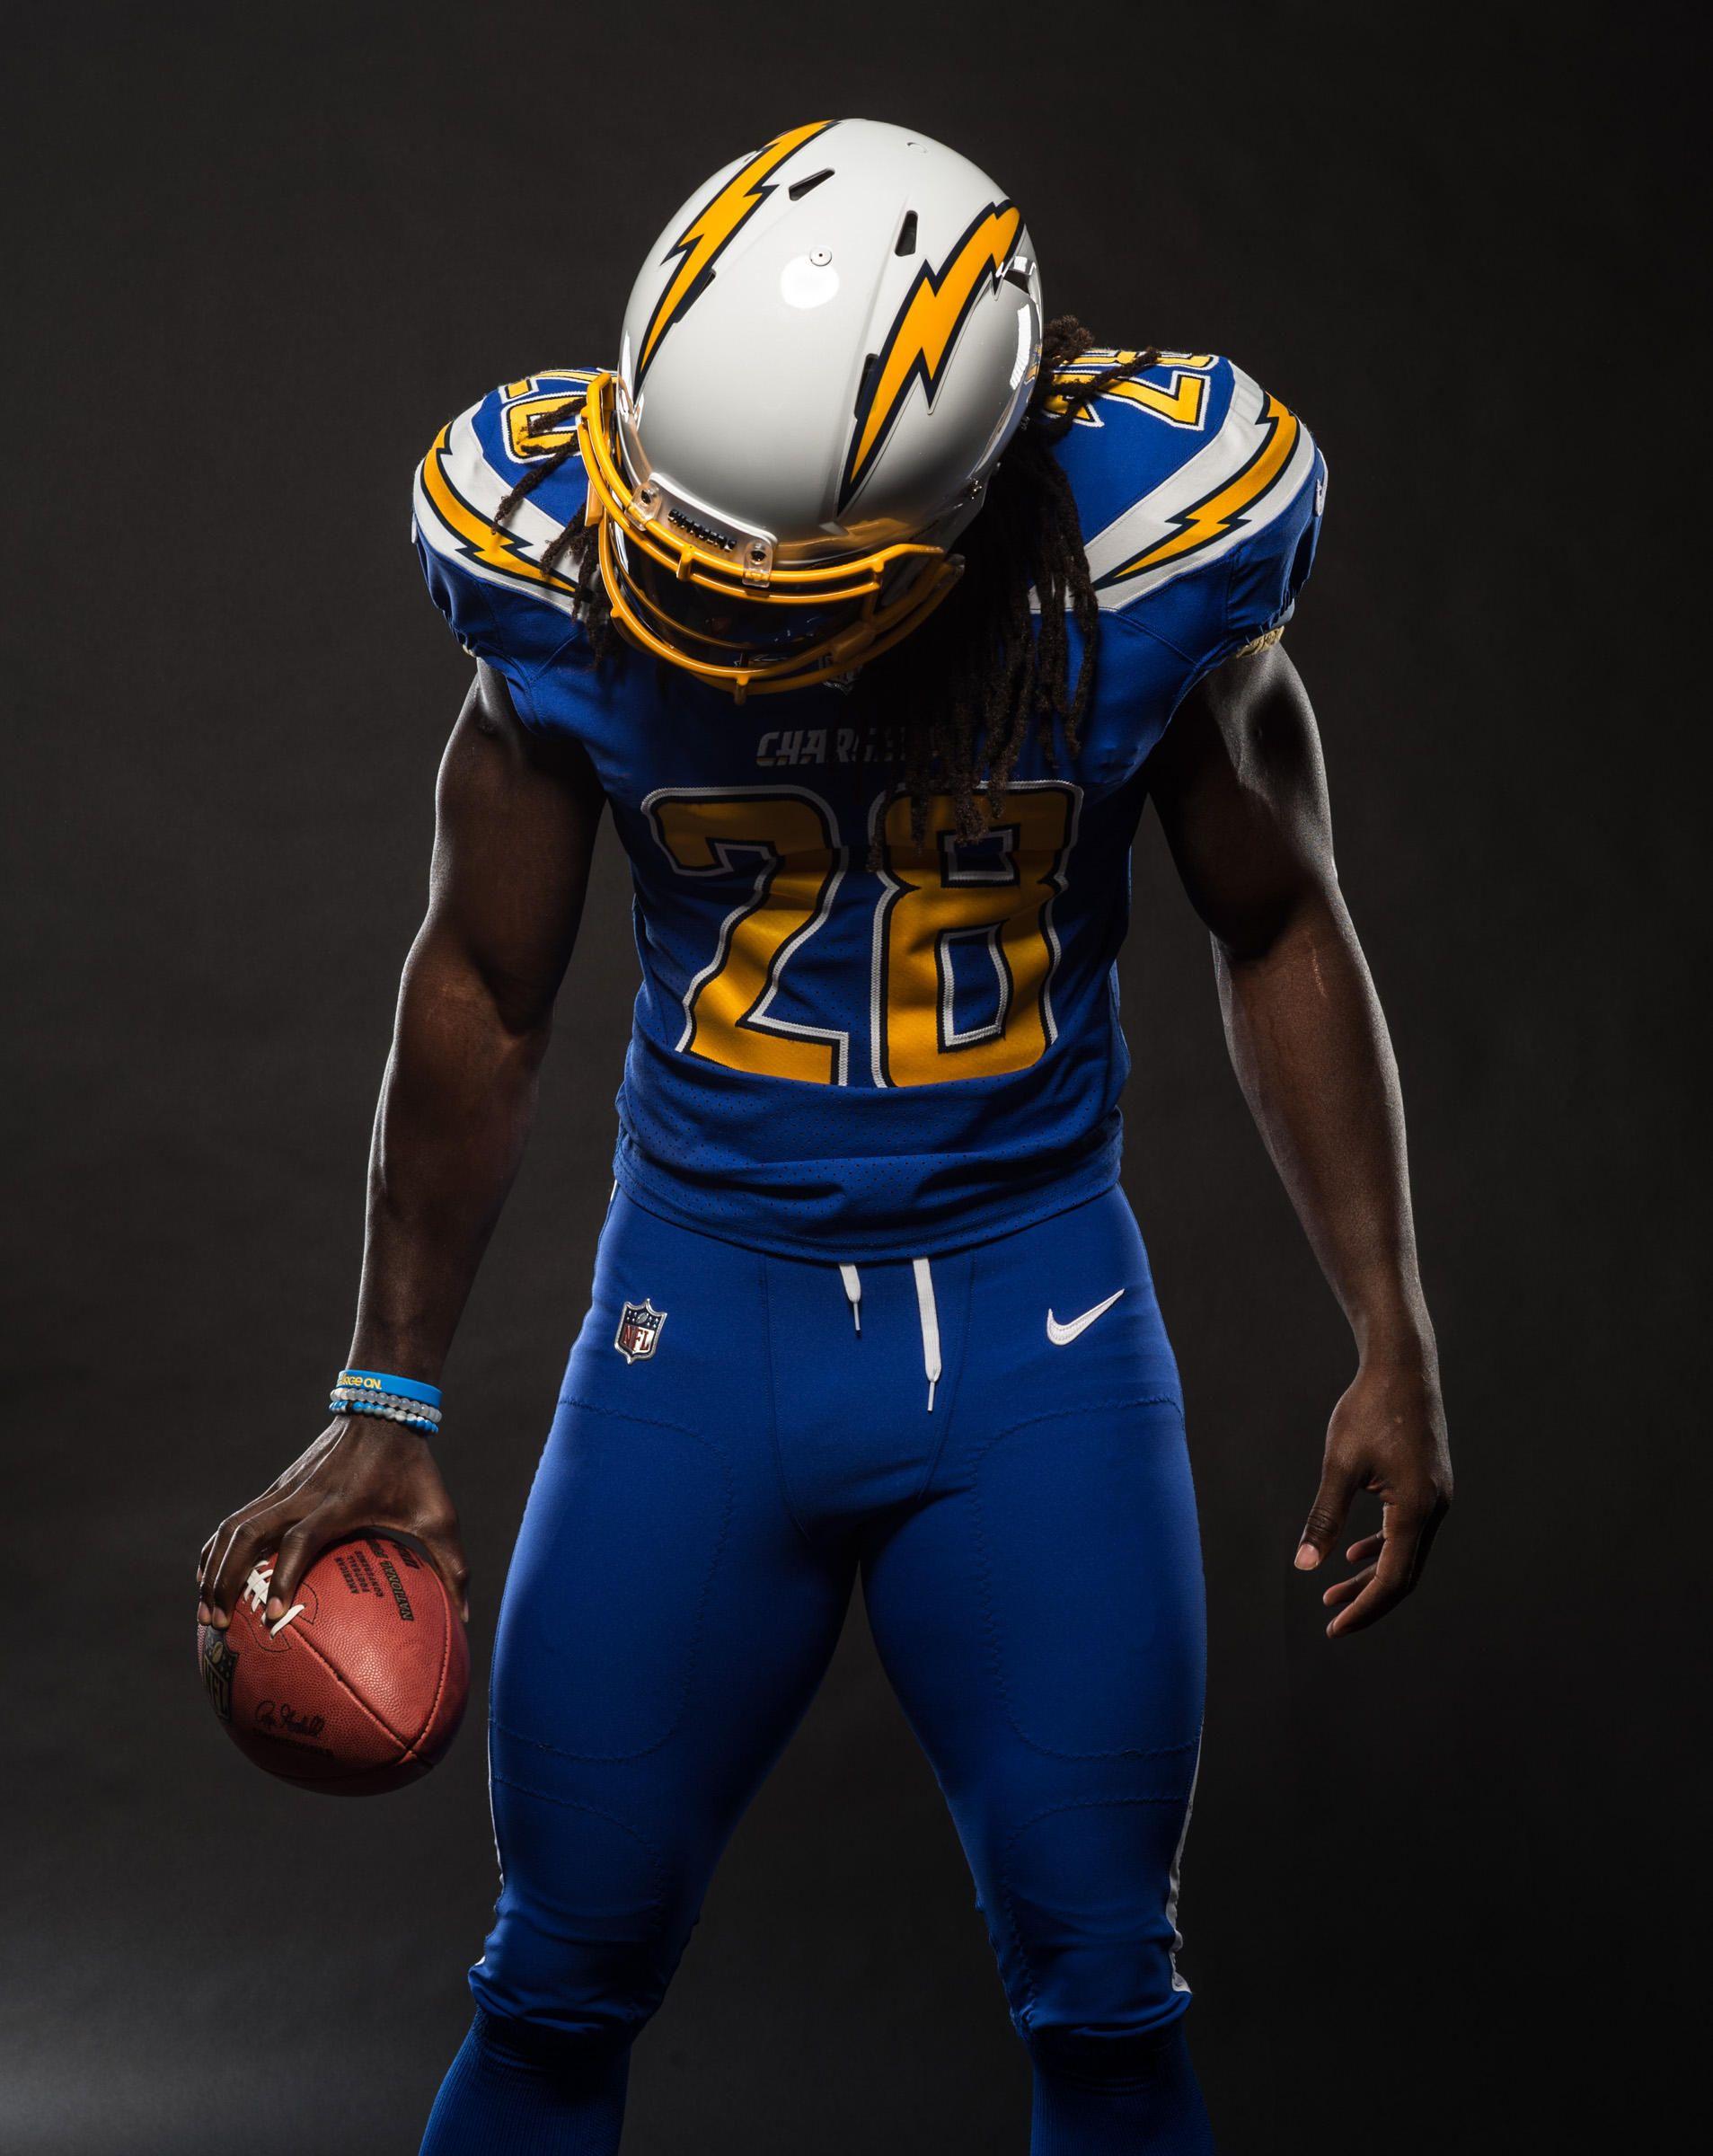 Color Rush Uniforms 2016. San Diego Chargers. San Diego Chargers